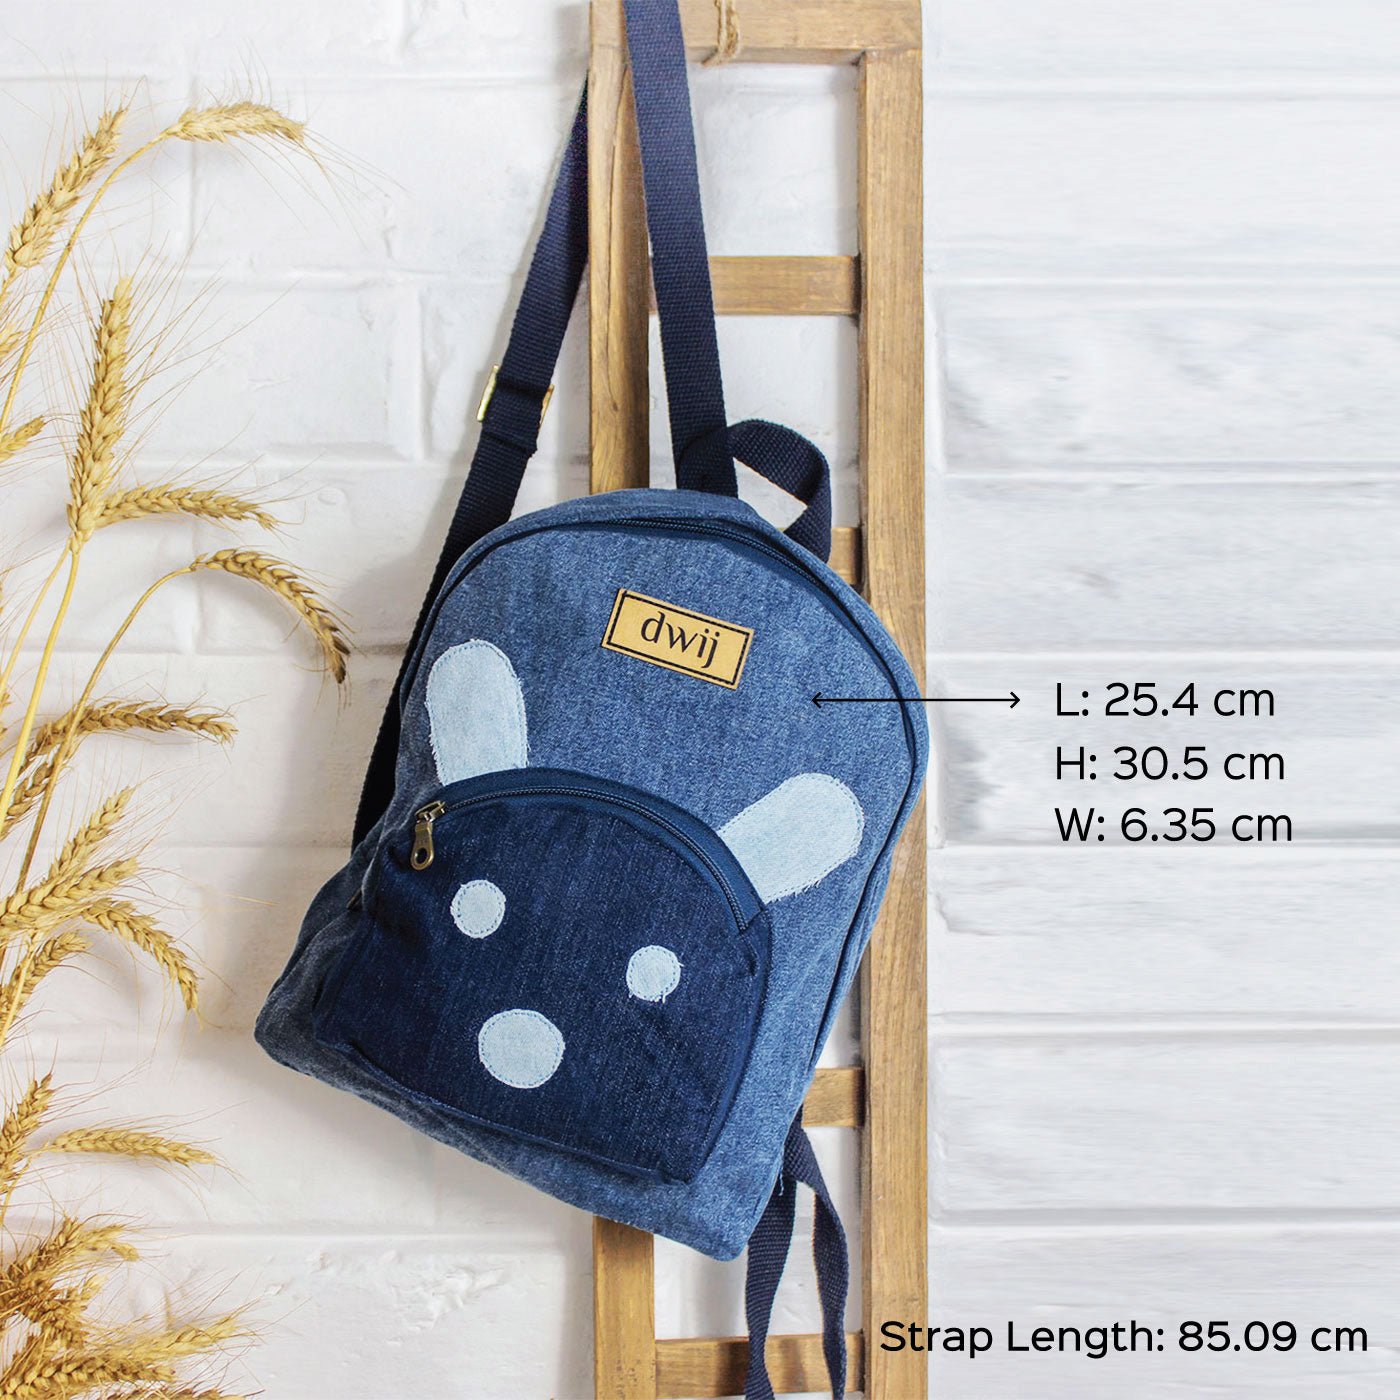 Upcycled Denim Slings | dwij products